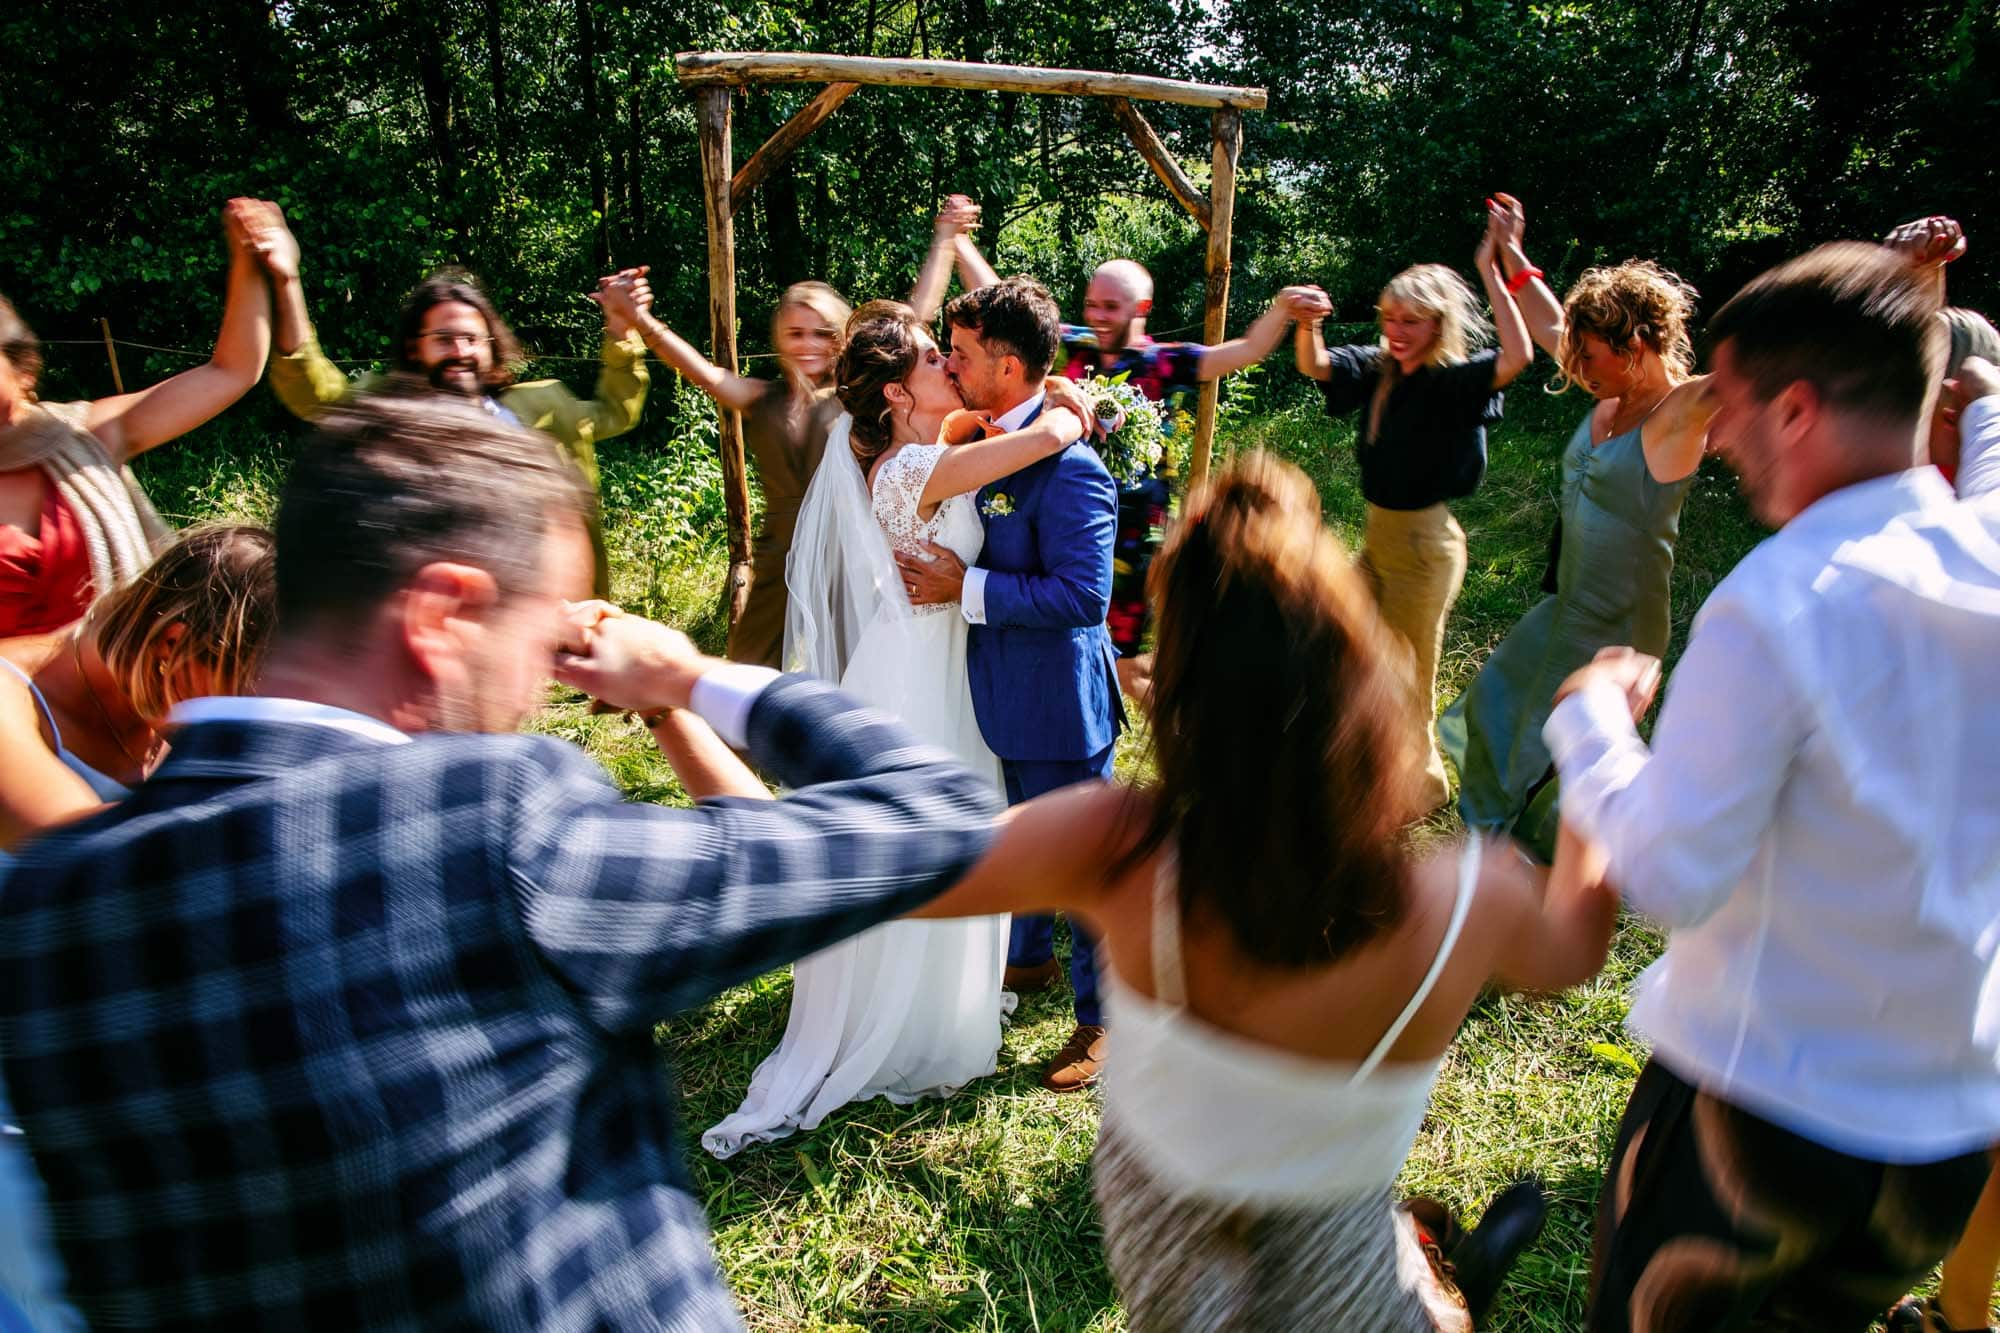 A group of people dancing in a field and taking special wedding photos.